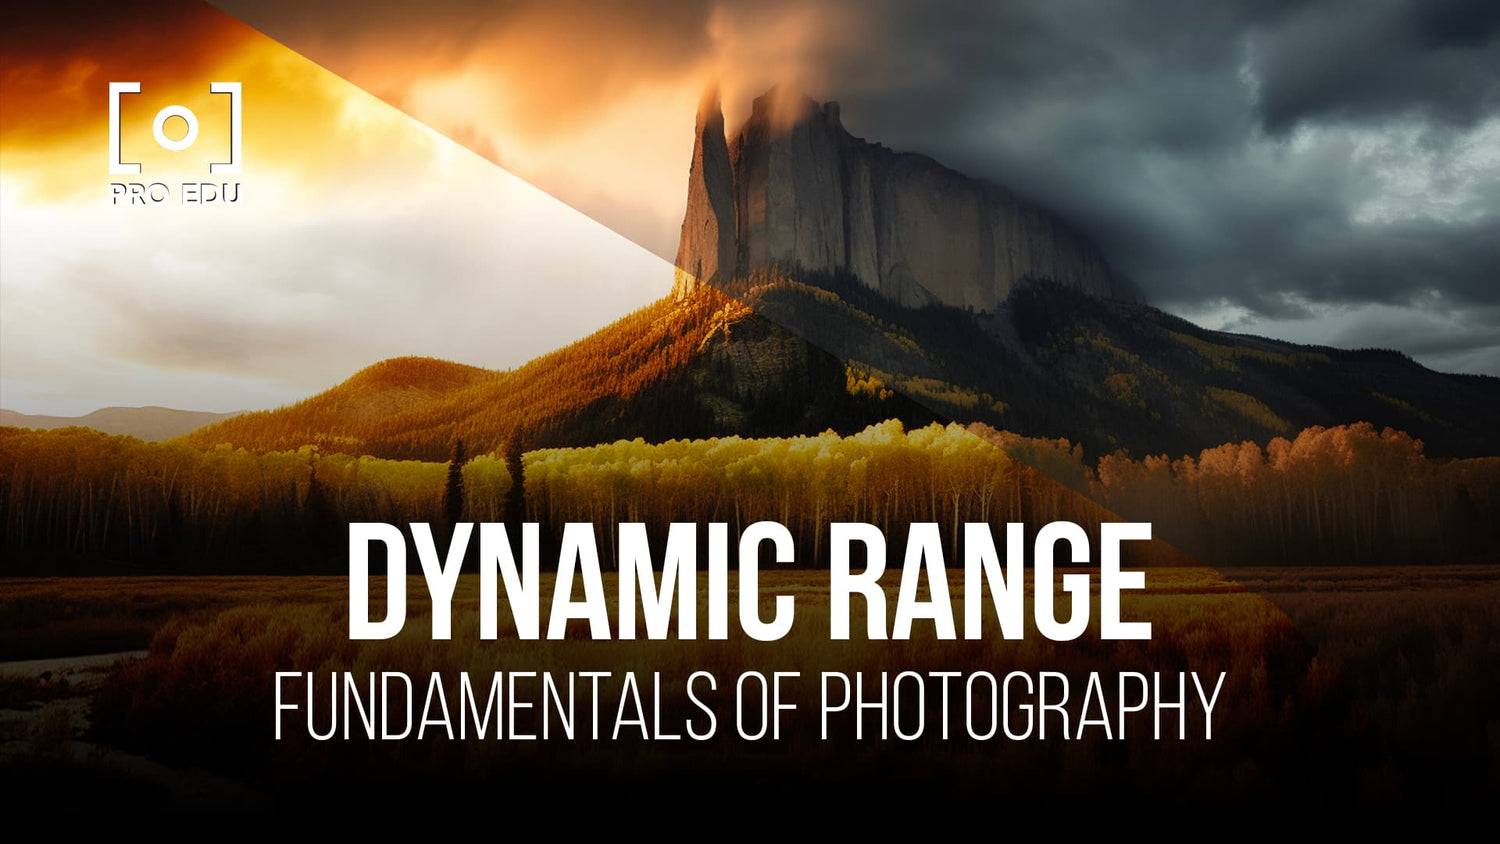 A comprehensive overview of understanding dynamic range in photography